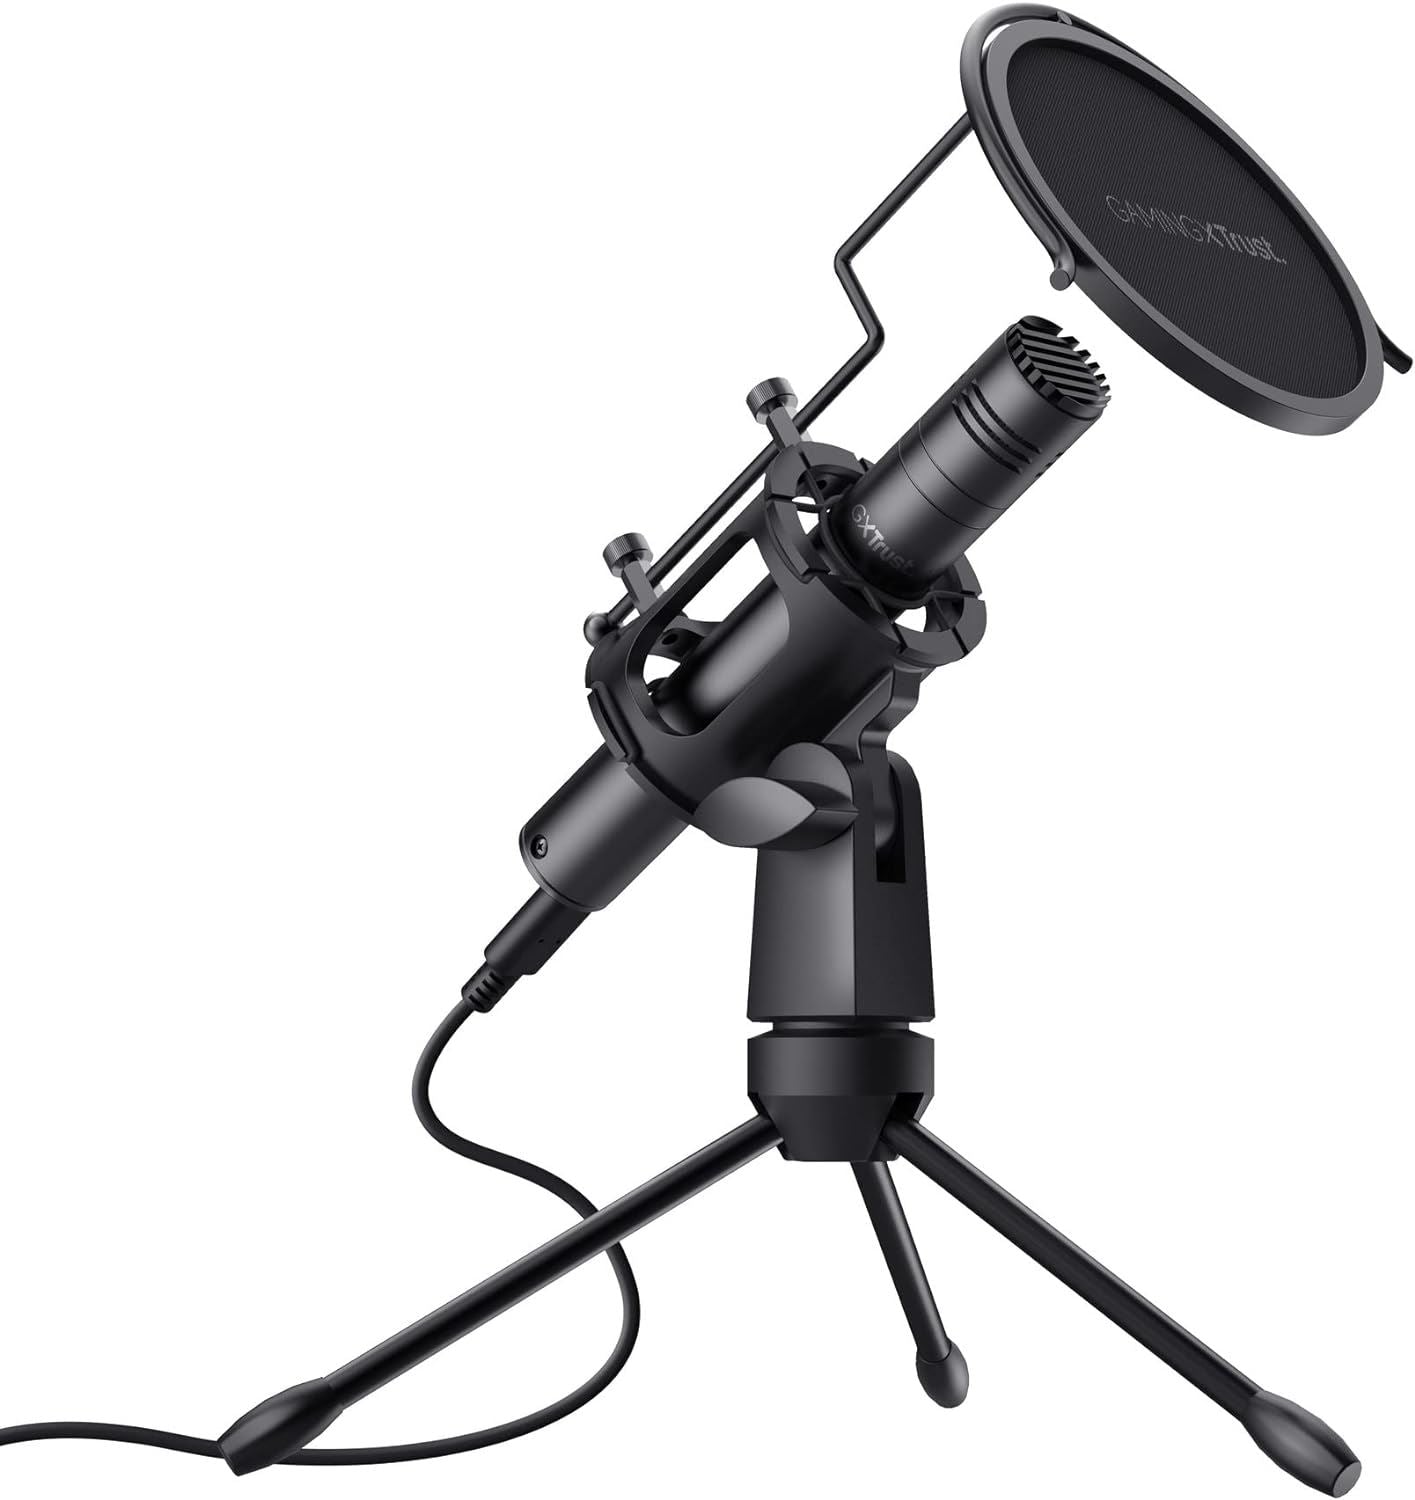 Official Trust GXT 241 Velica USB Gaming Microphone with Tripod Stand Black - 24182